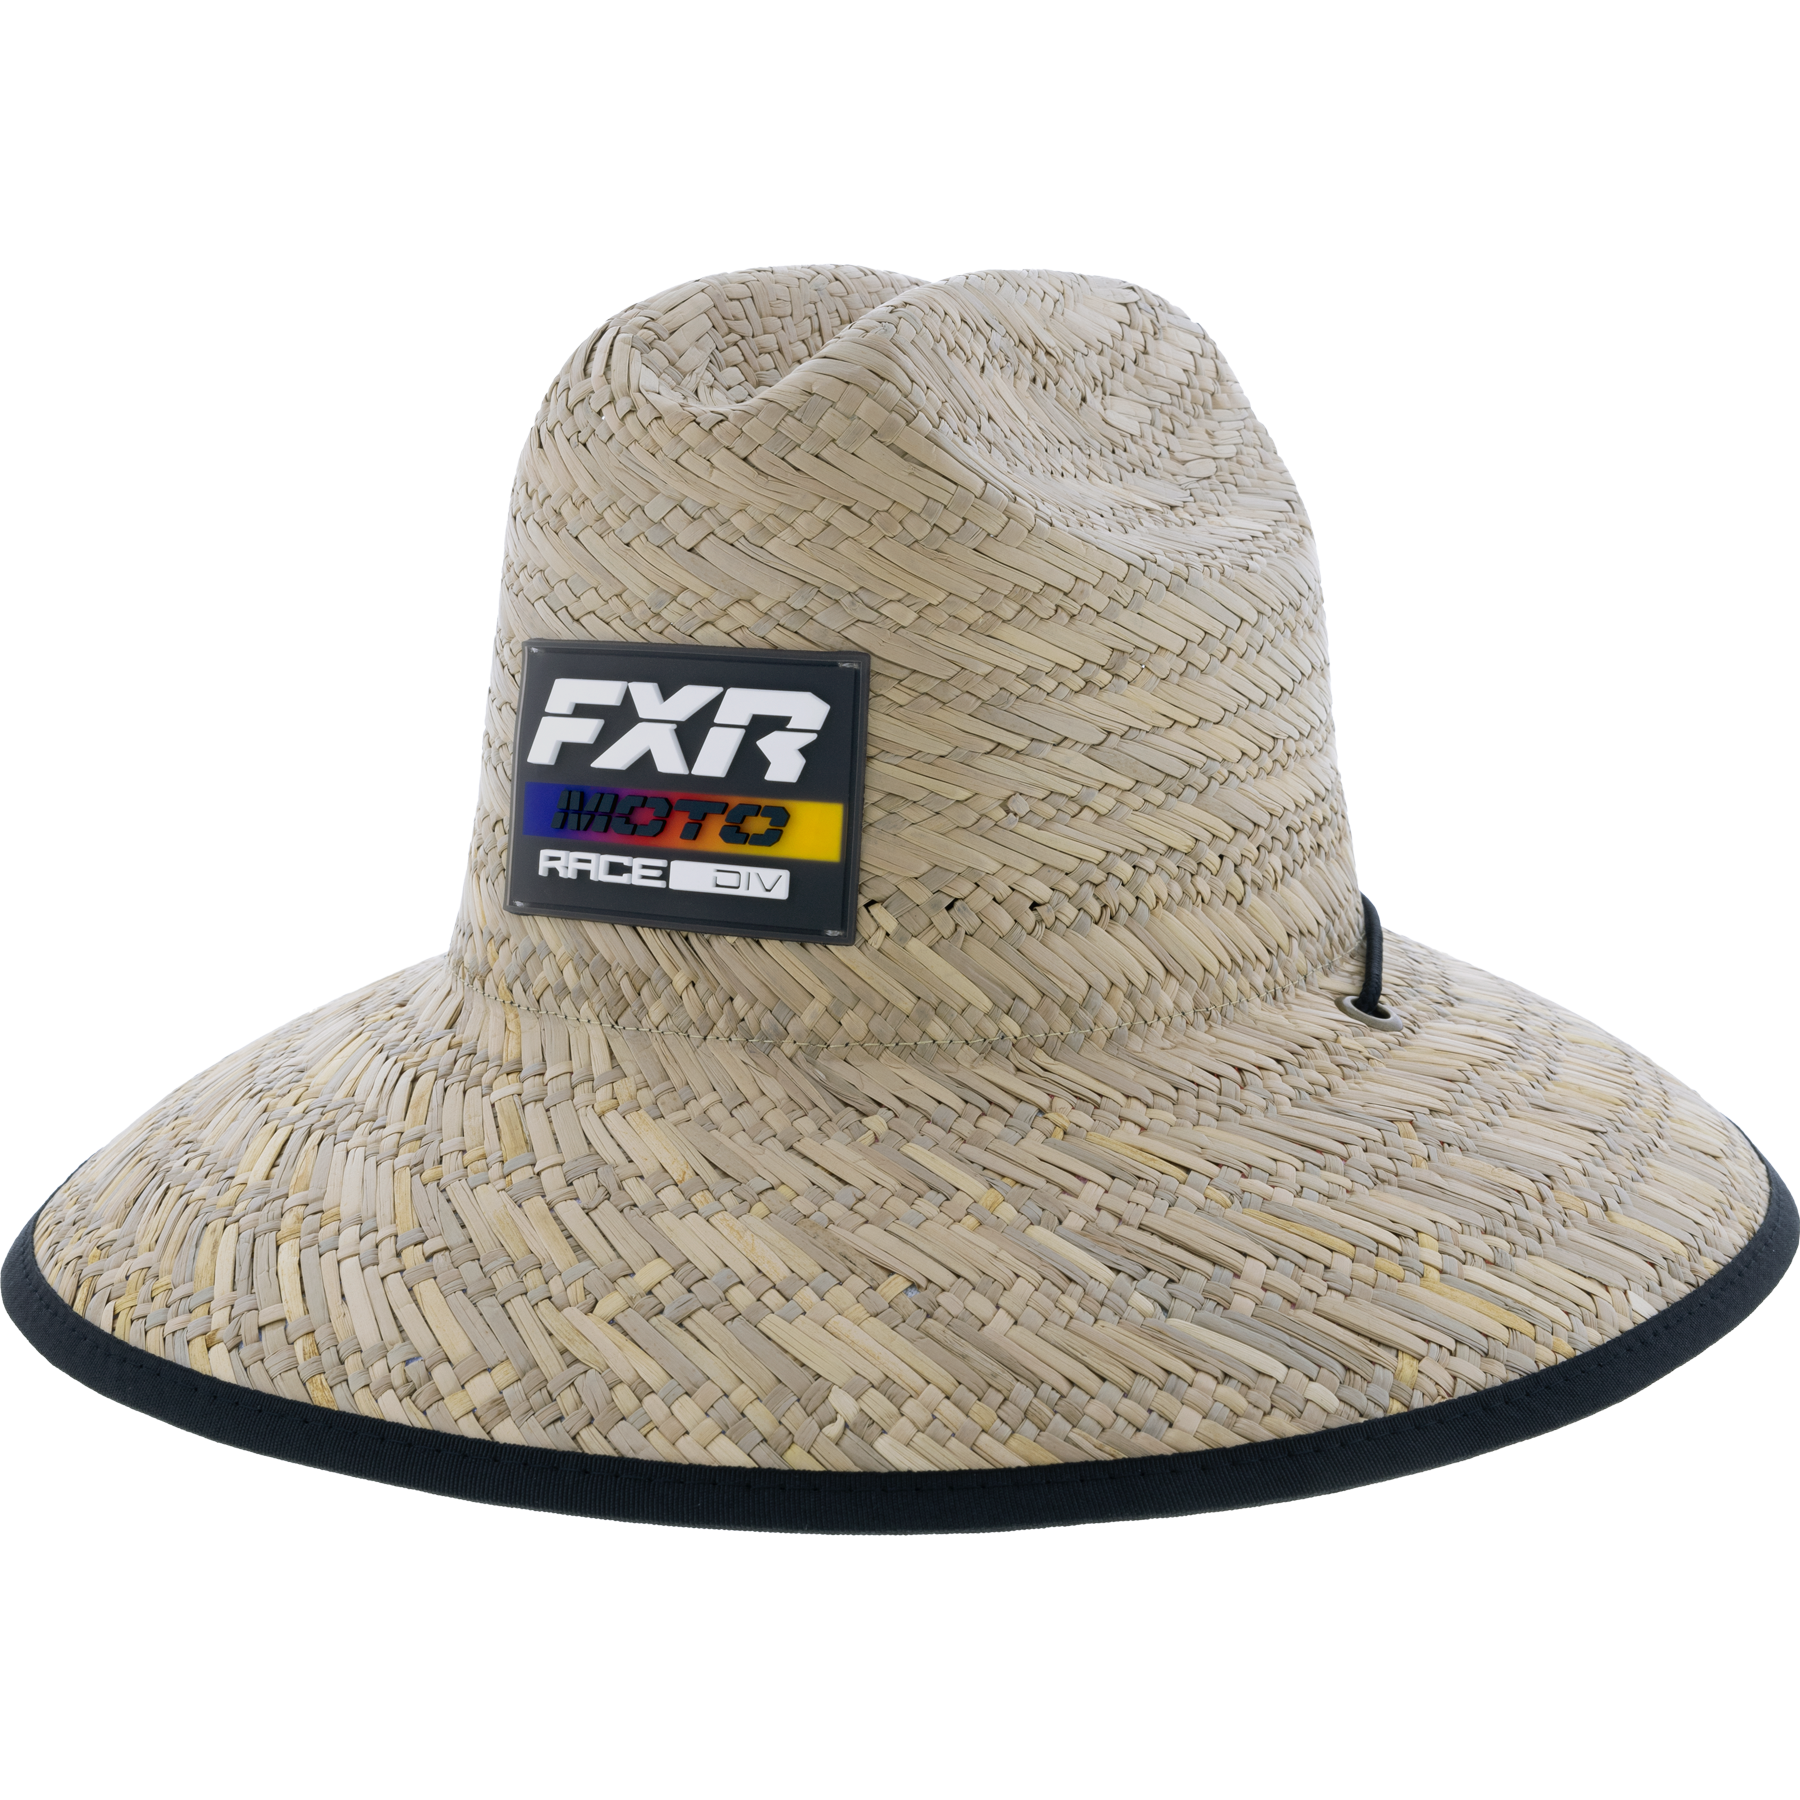 fxr racing hats adult shoreside straw hats - casual